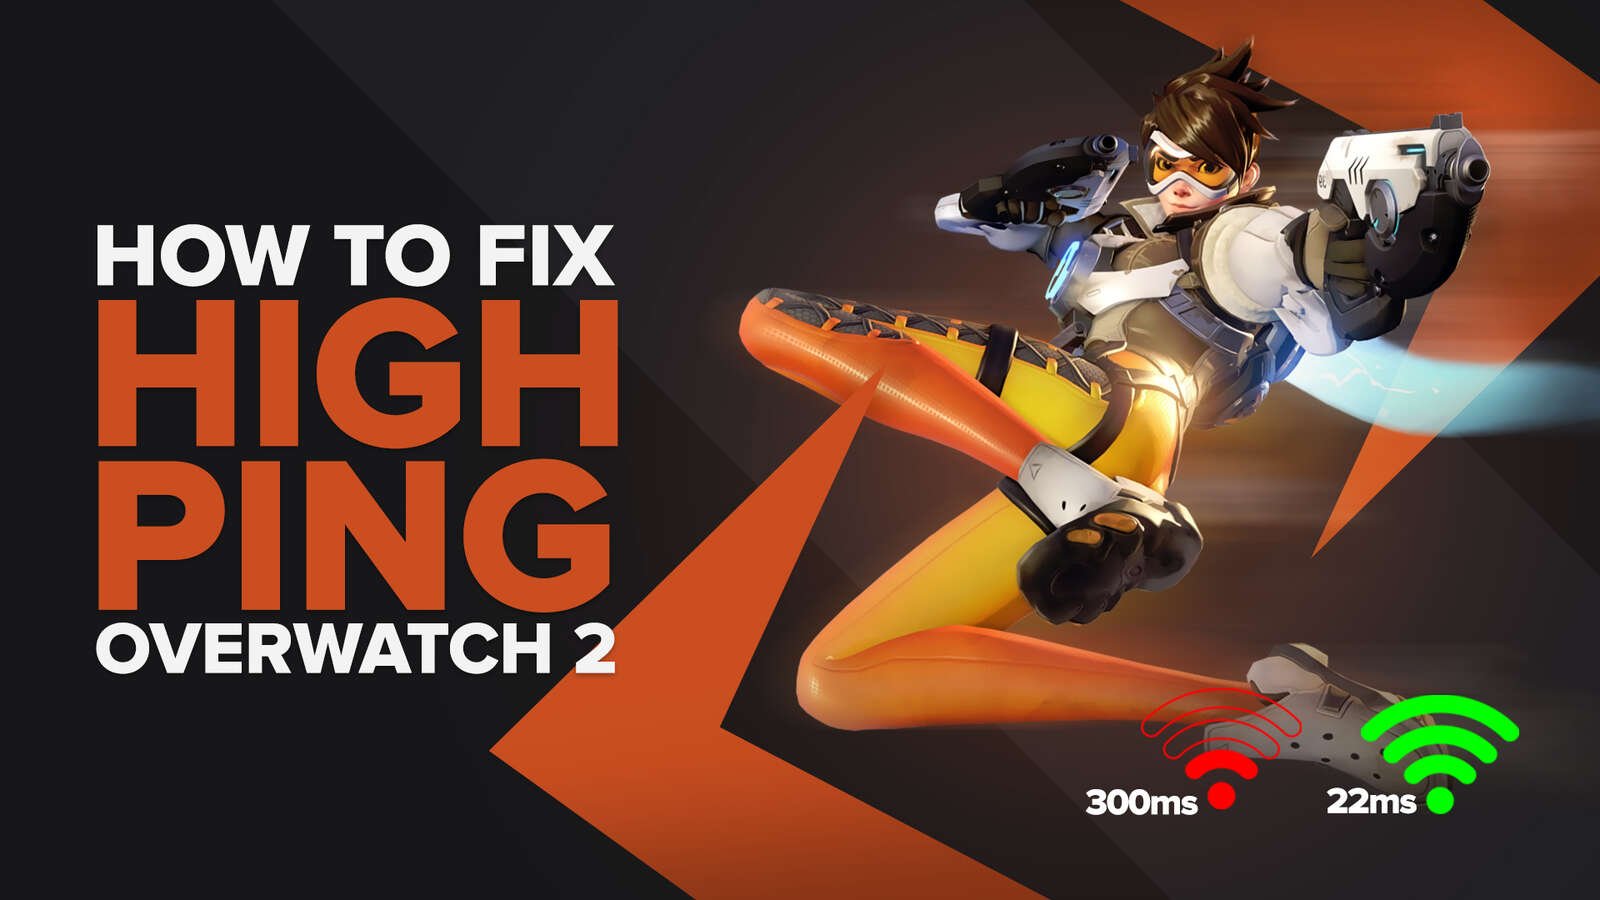 6 Proven Ways to Fix High Ping in Overwatch 2